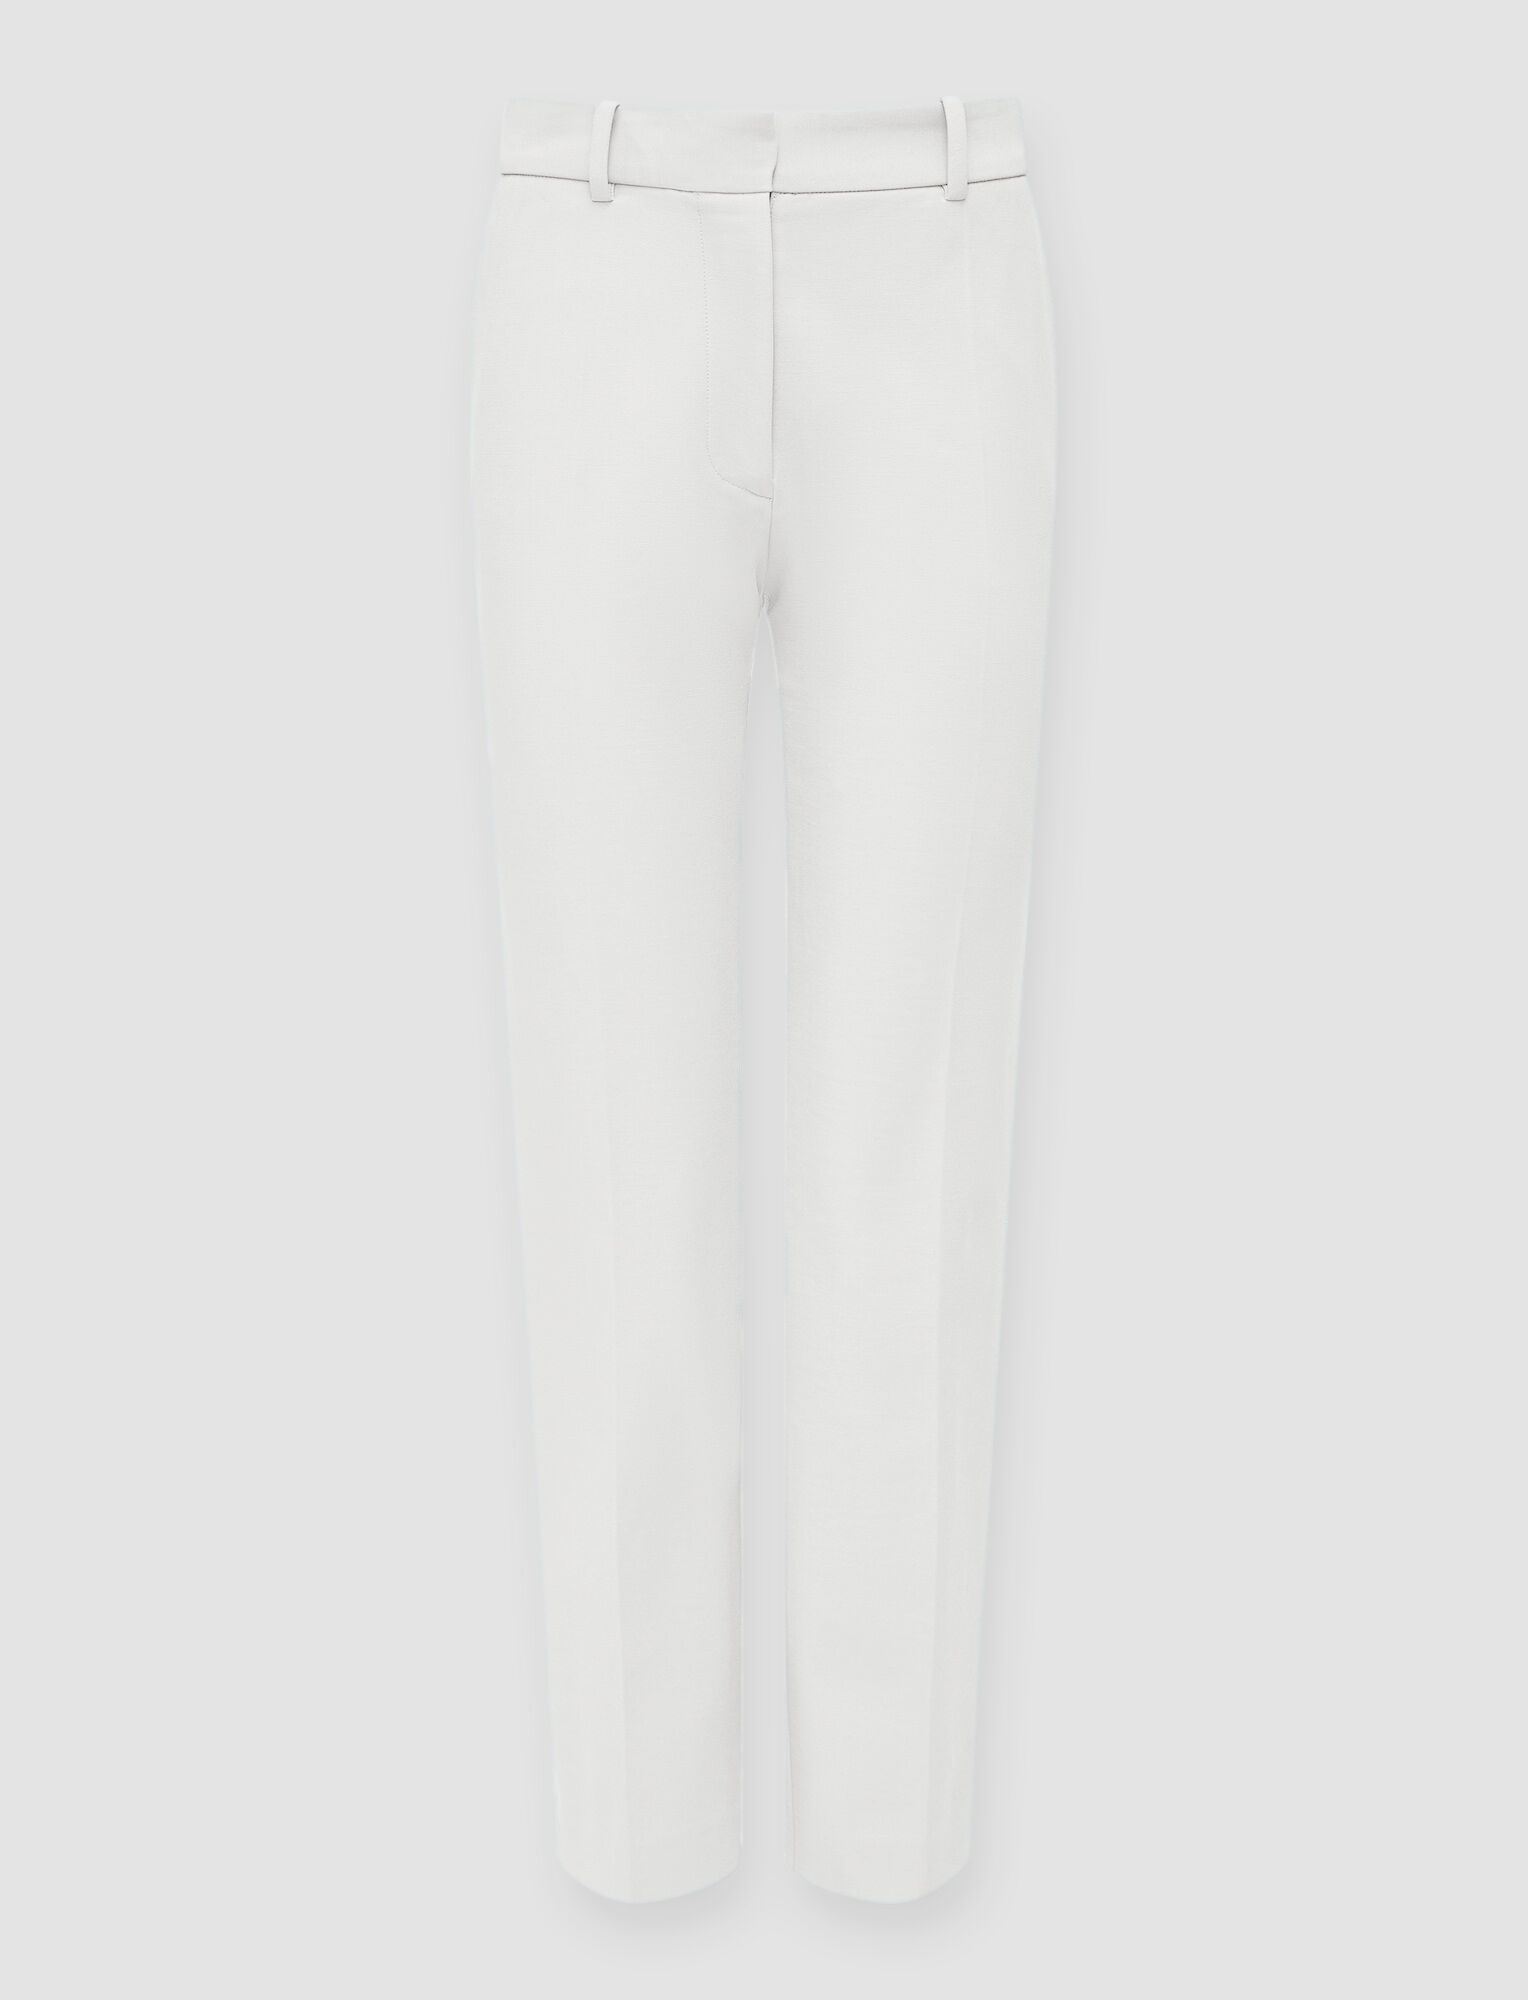 Joseph, Toile Stretch Coleman Trousers, in Ivory